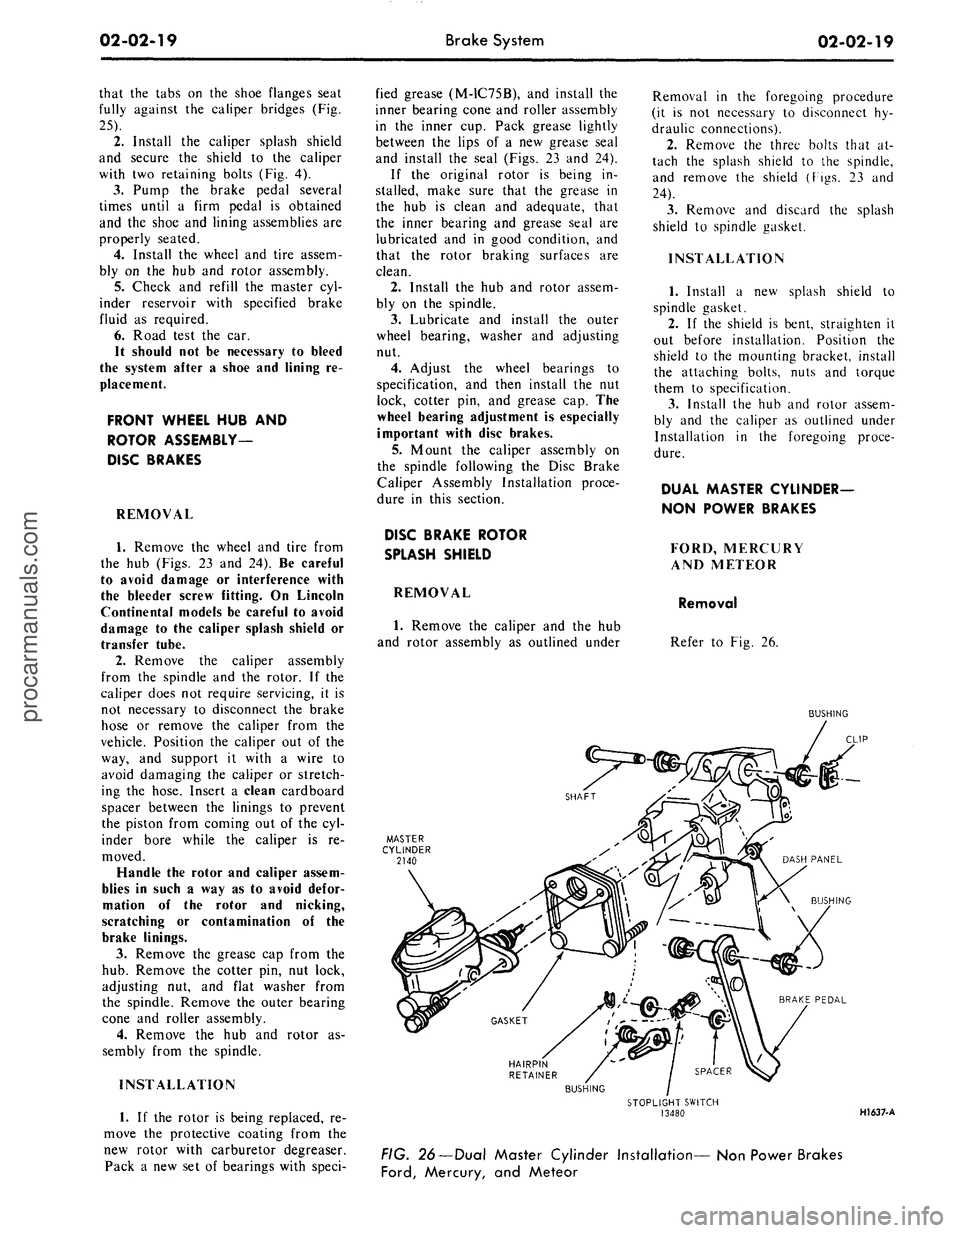 FORD MUSTANG 1969  Volume One Chassis 
02-02-19 
Brake System

02-02-19

that the tabs on the shoe flanges seat

fully against the caliper bridges (Fig.

25).

2.
 Install the caliper splash shield

and secure the shield to the caliper

w